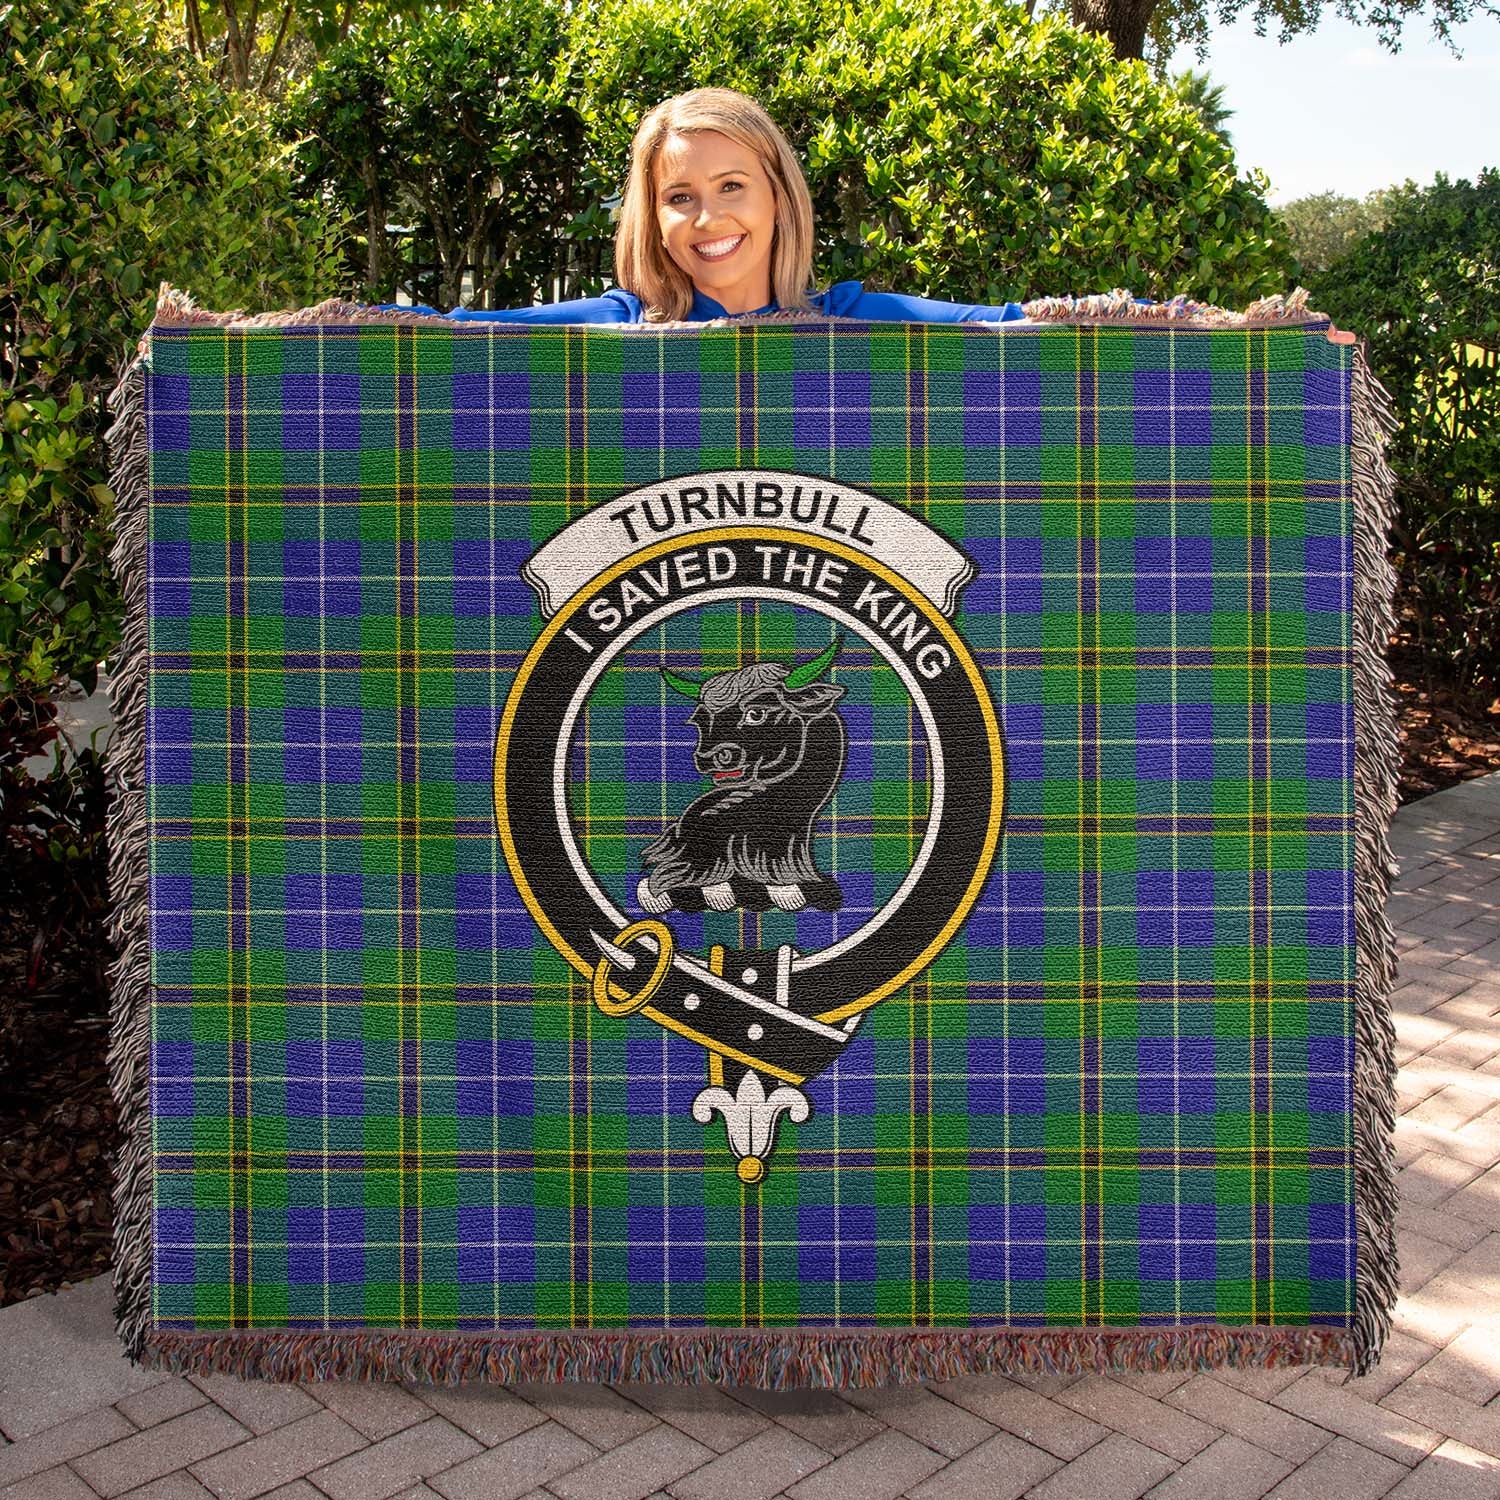 Tartan Vibes Clothing Turnbull Hunting Tartan Woven Blanket with Family Crest